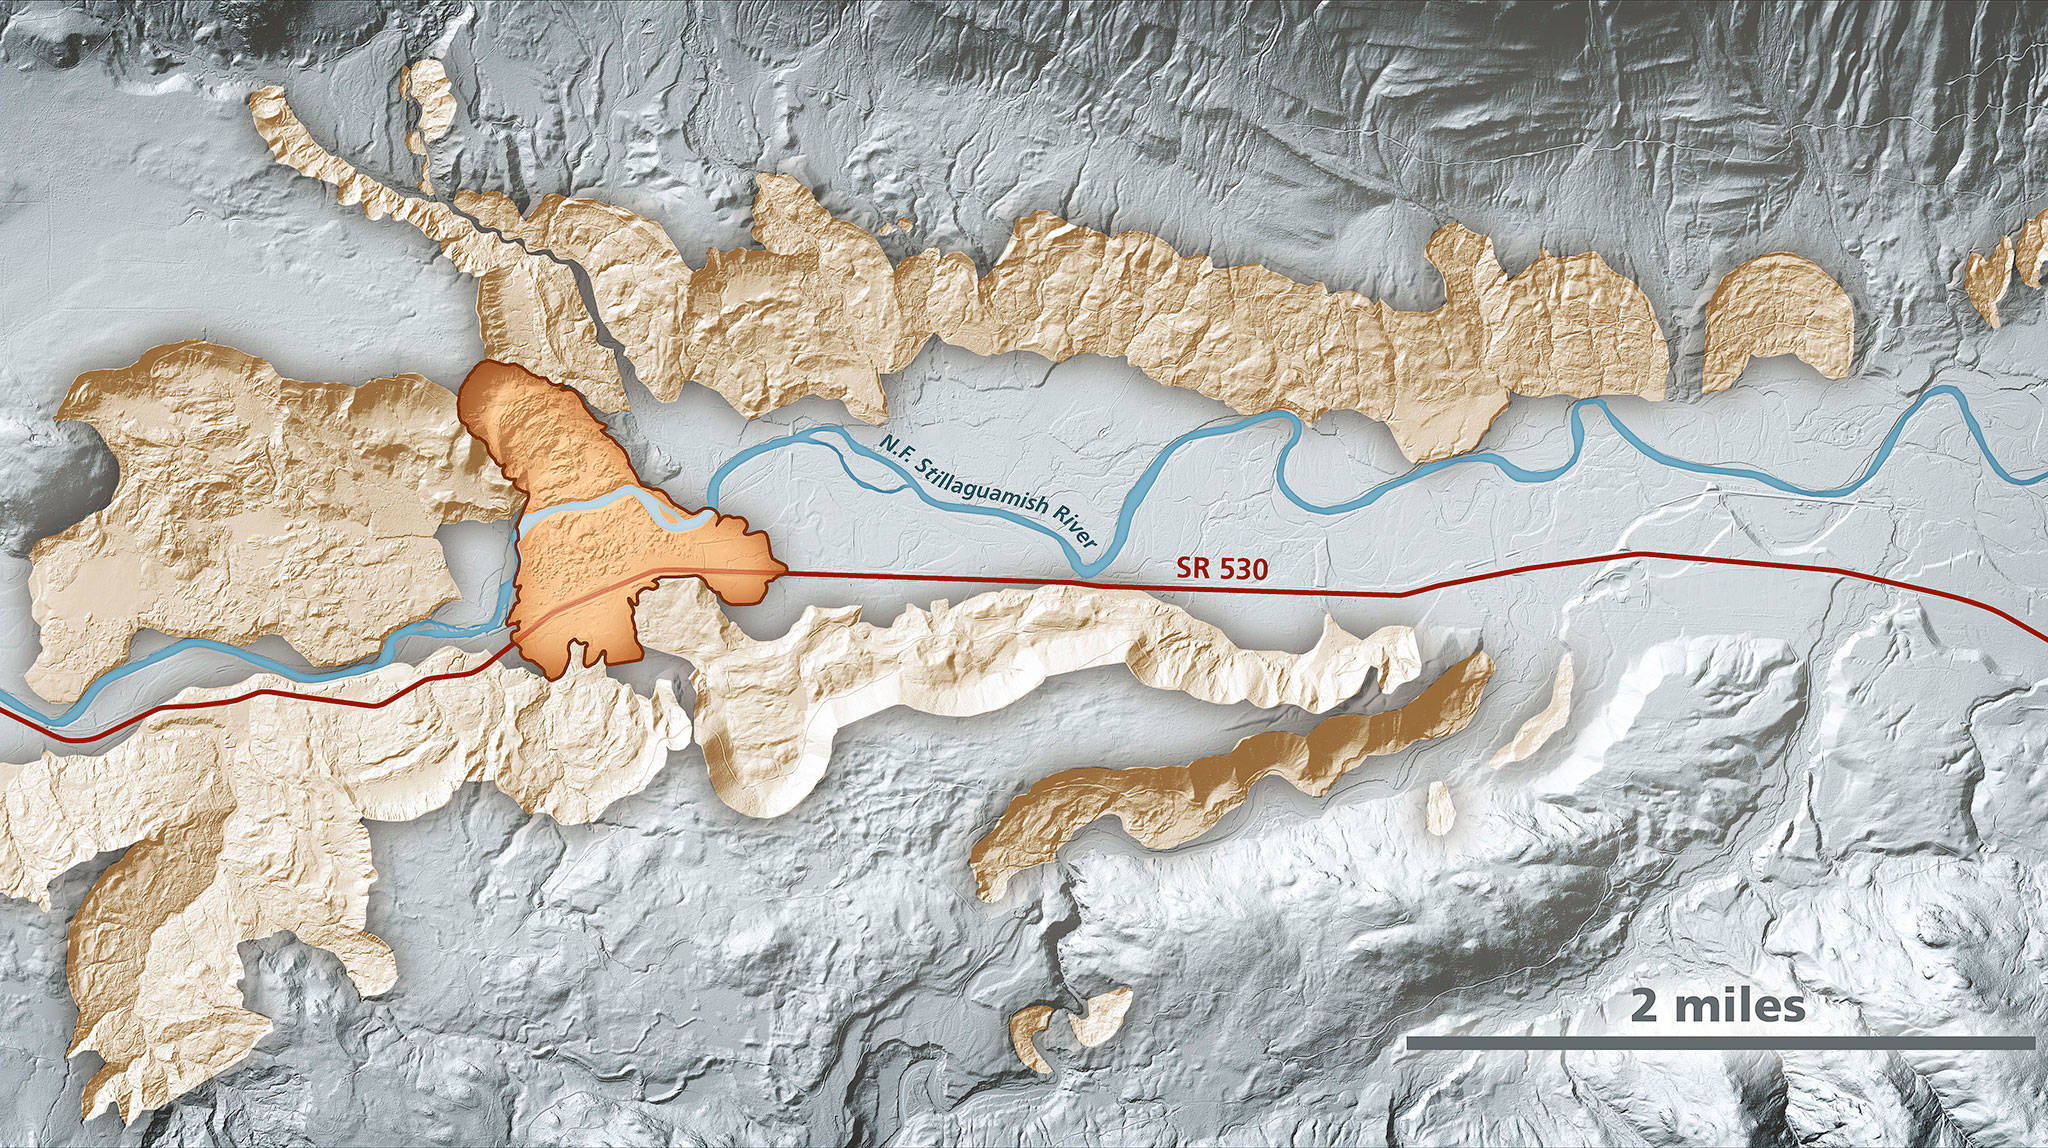 Lidar imagery enables geologists to accurately identify landslides, such as the area around the Highway 530 Oso landslide. In this area, lidar data show prehistoric landslides in beige along the North Fork Stillaguamish River. The darker-shaded outlined area is the extent of the March 2014 Oso landslide. (Daniel Coe / Washington State Department of Natural Resources)